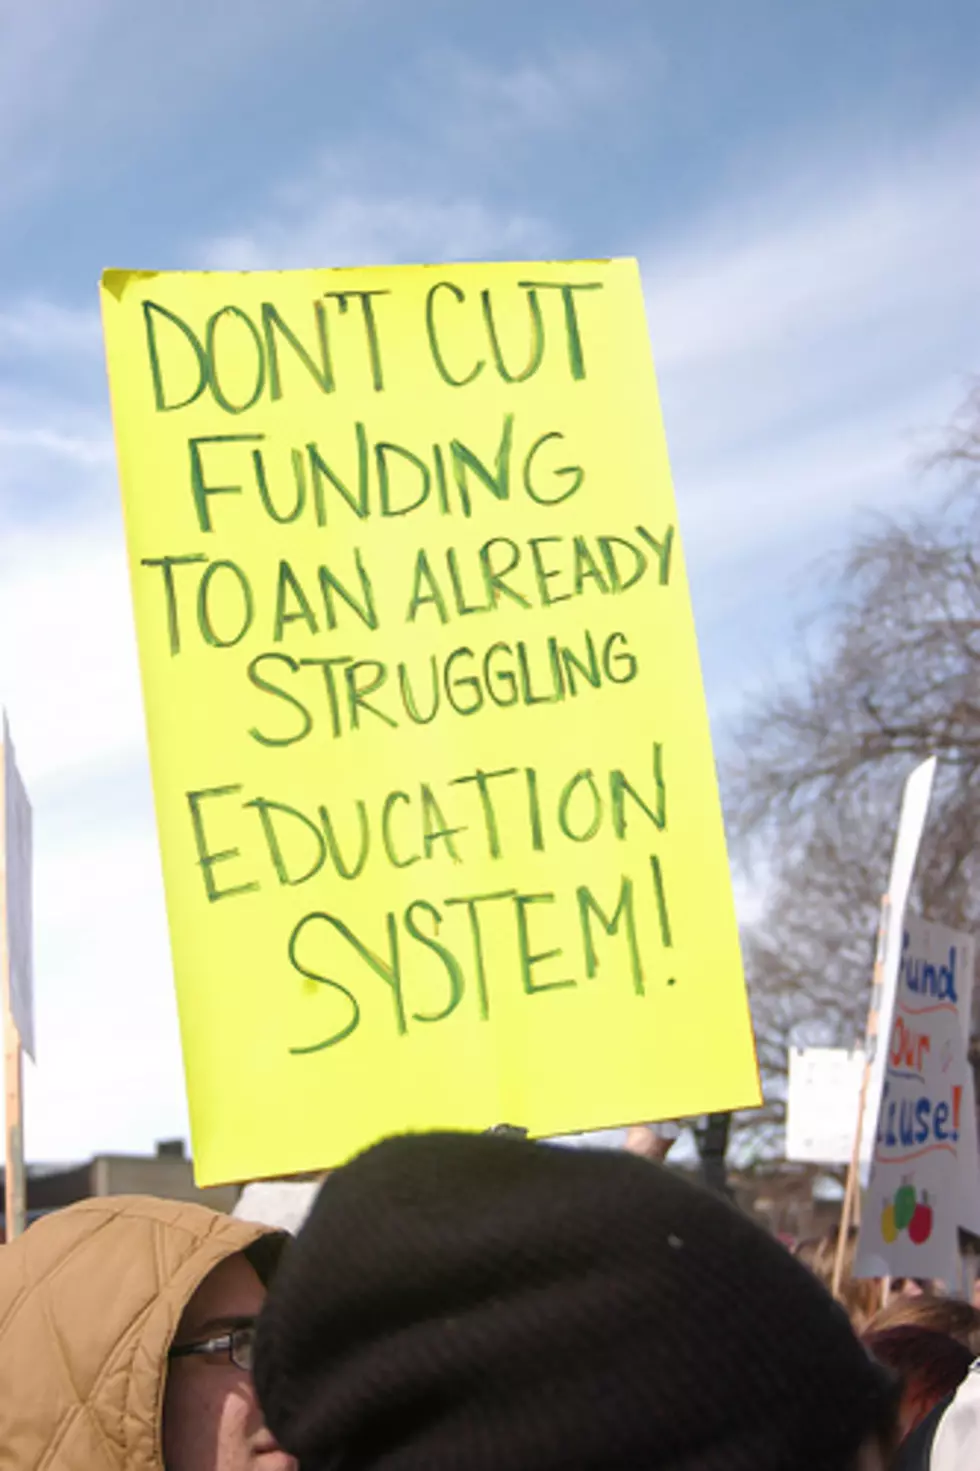 School Superintendents Say Education Will Suffer if School Funds are Cut